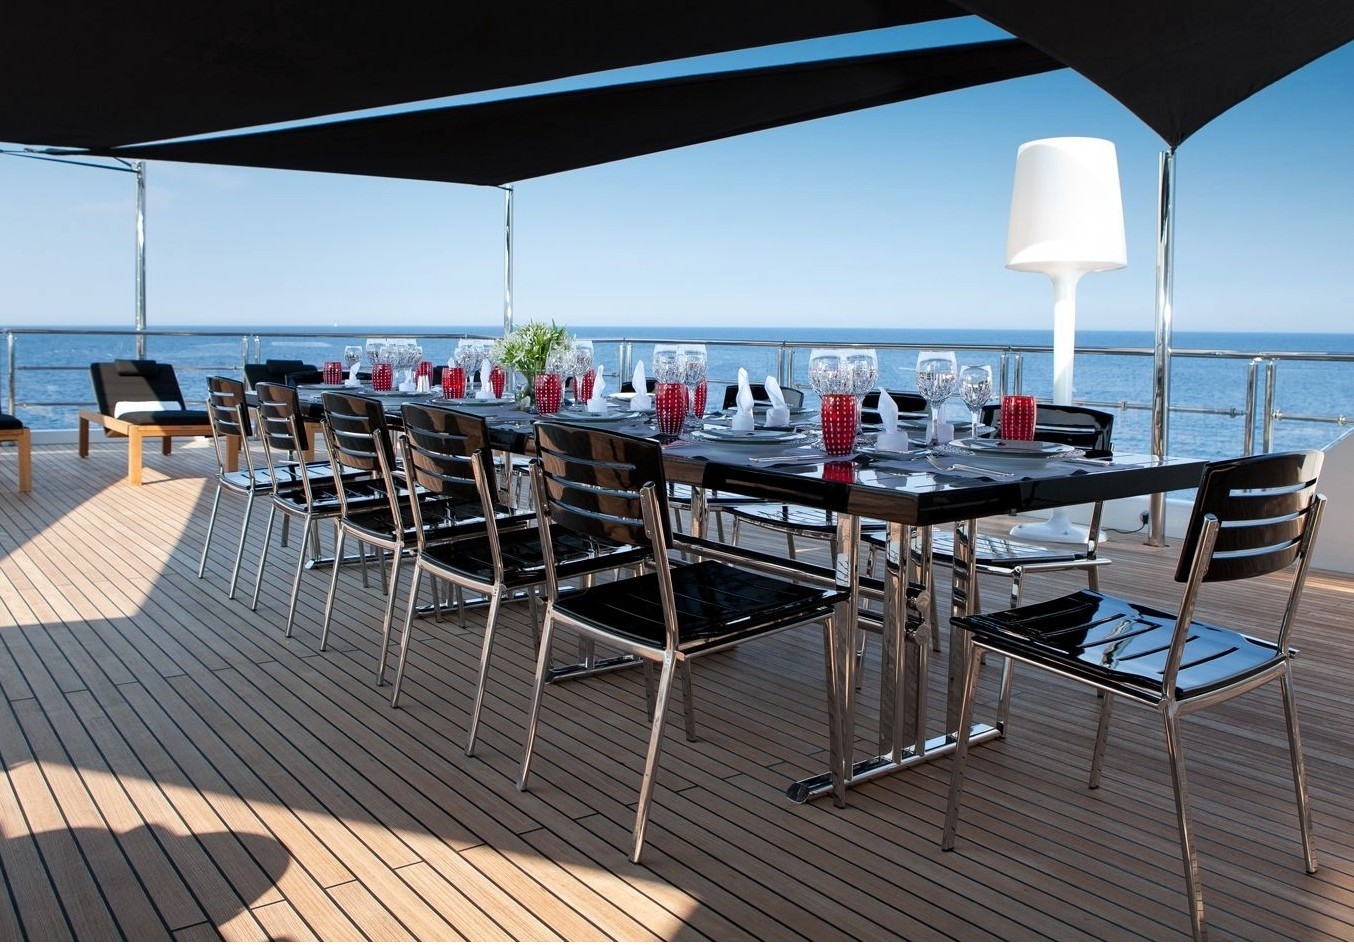 External Eating/dining Aboard Yacht IDOL